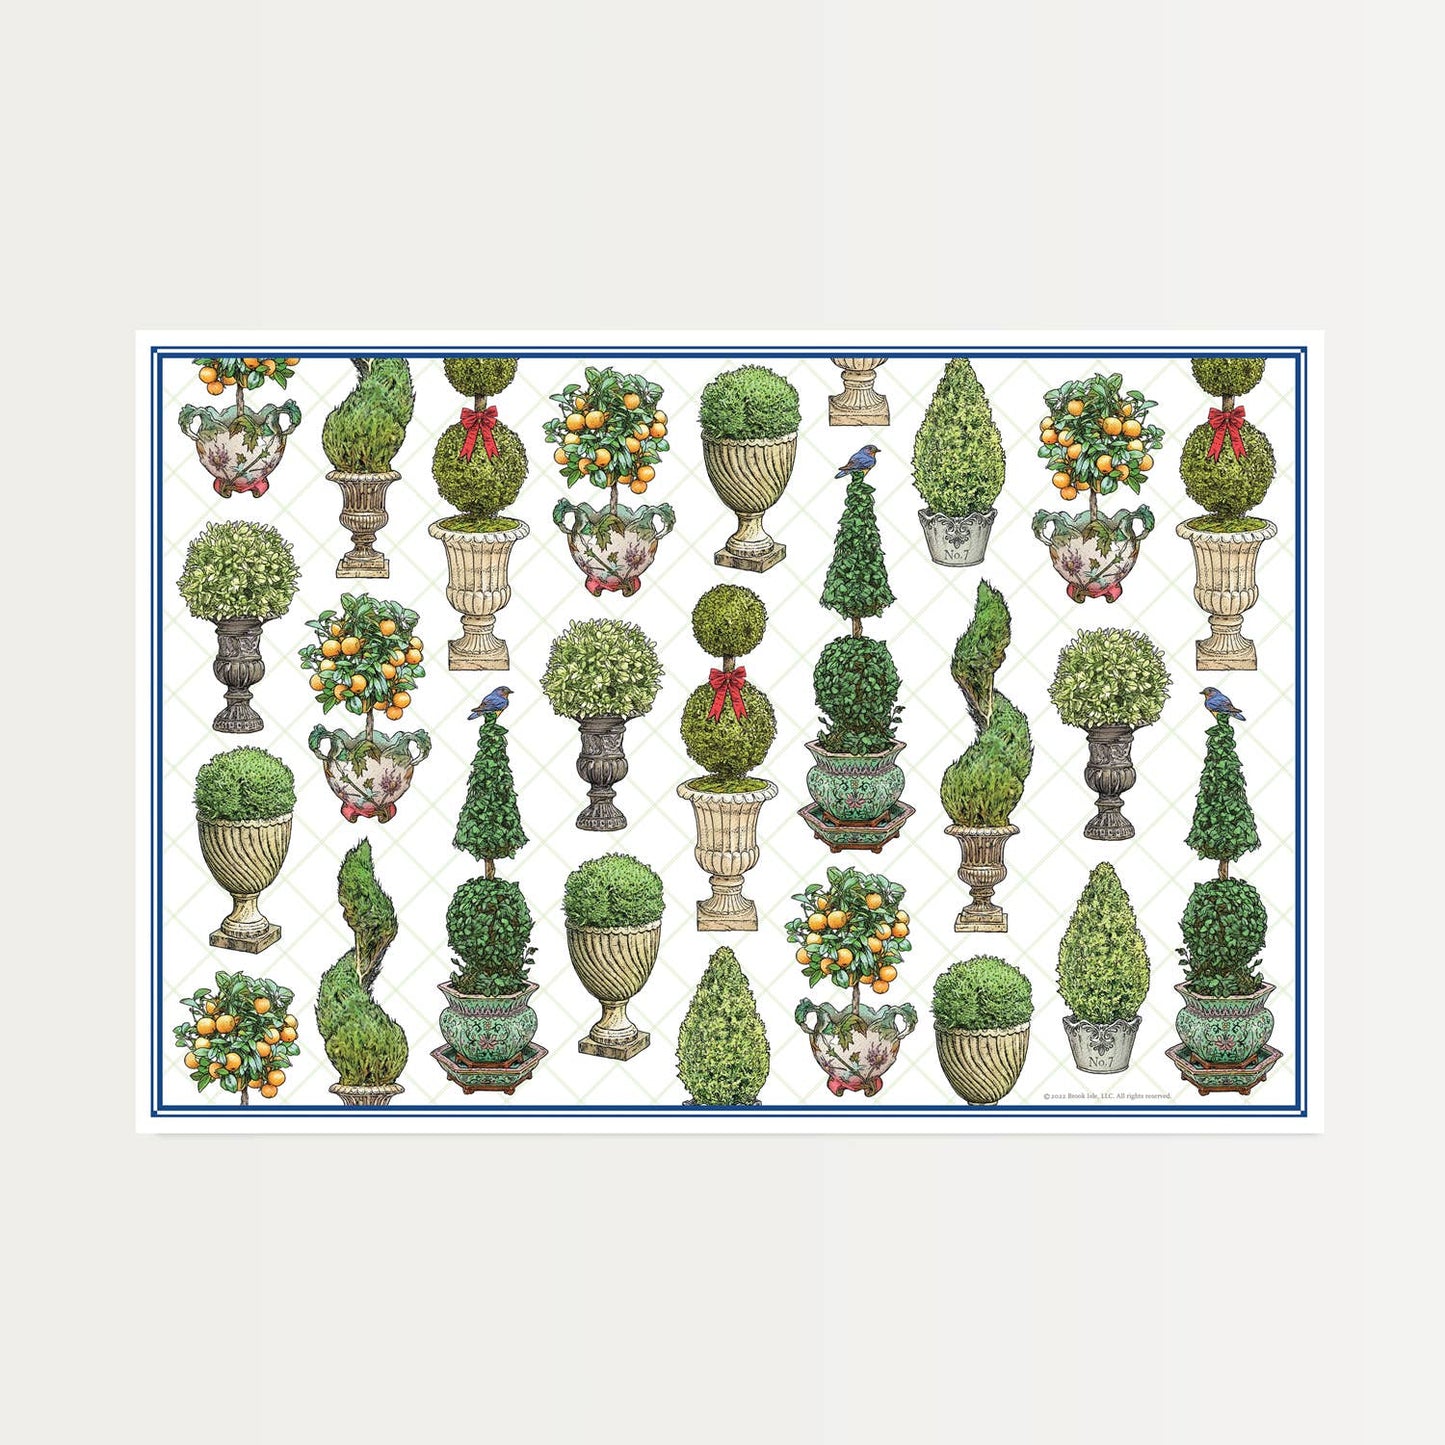 Paper Placemats (Set of 12) - Fenwick & OliverPaper Placemats (Set of 12)PaperBrook IsleFenwick & OliverMAT-Fern-4